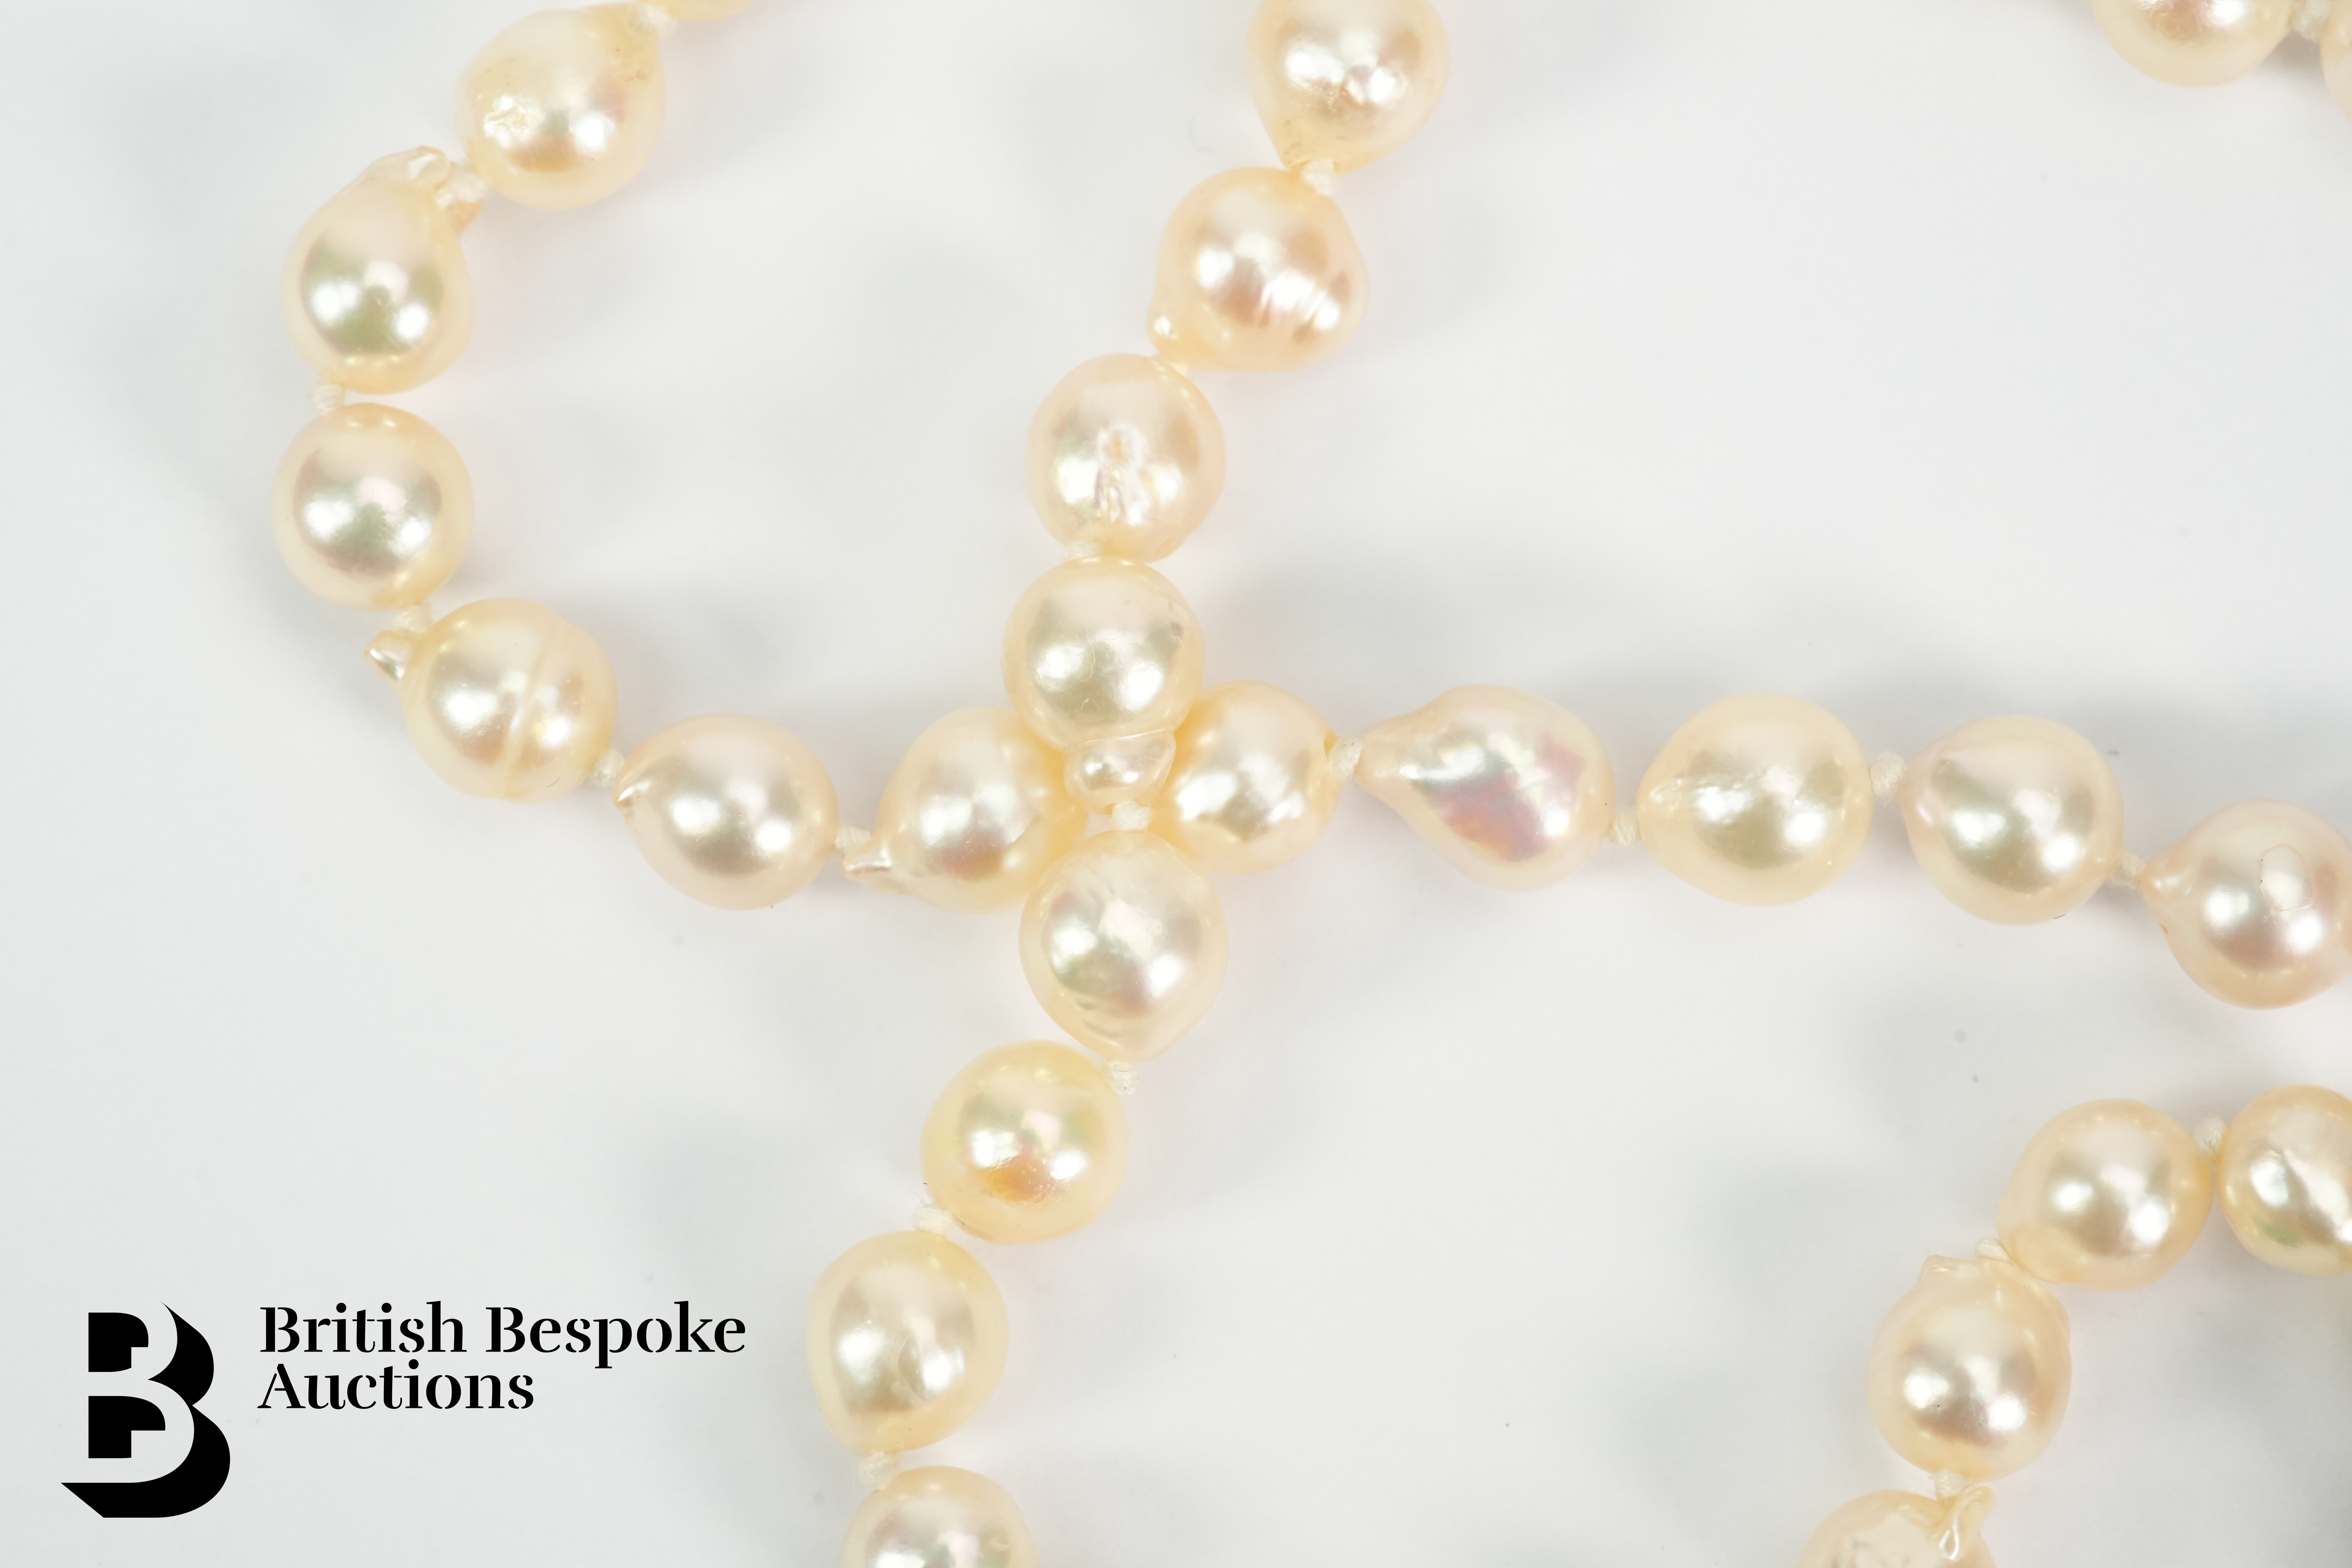 Single Strand Pearl Necklace - Image 4 of 5